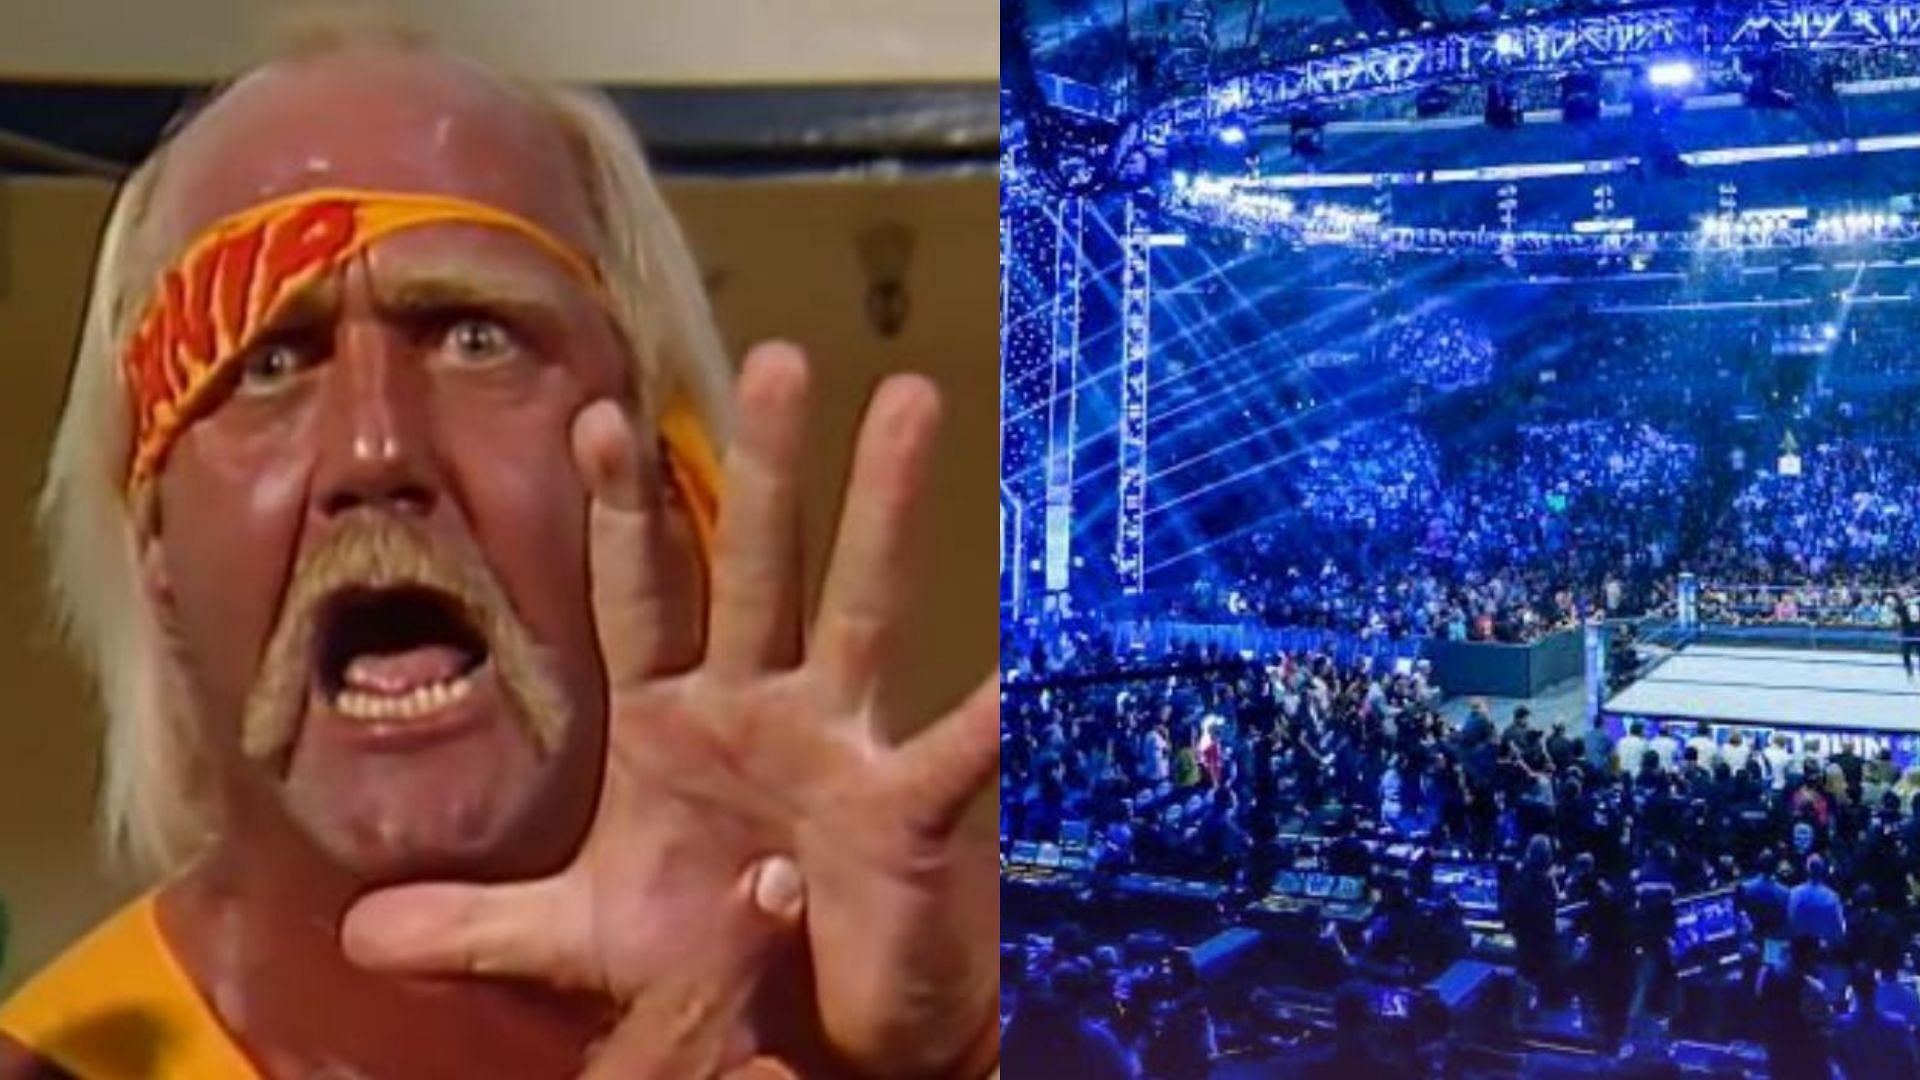 Hulk Hogan was almost shot at the event